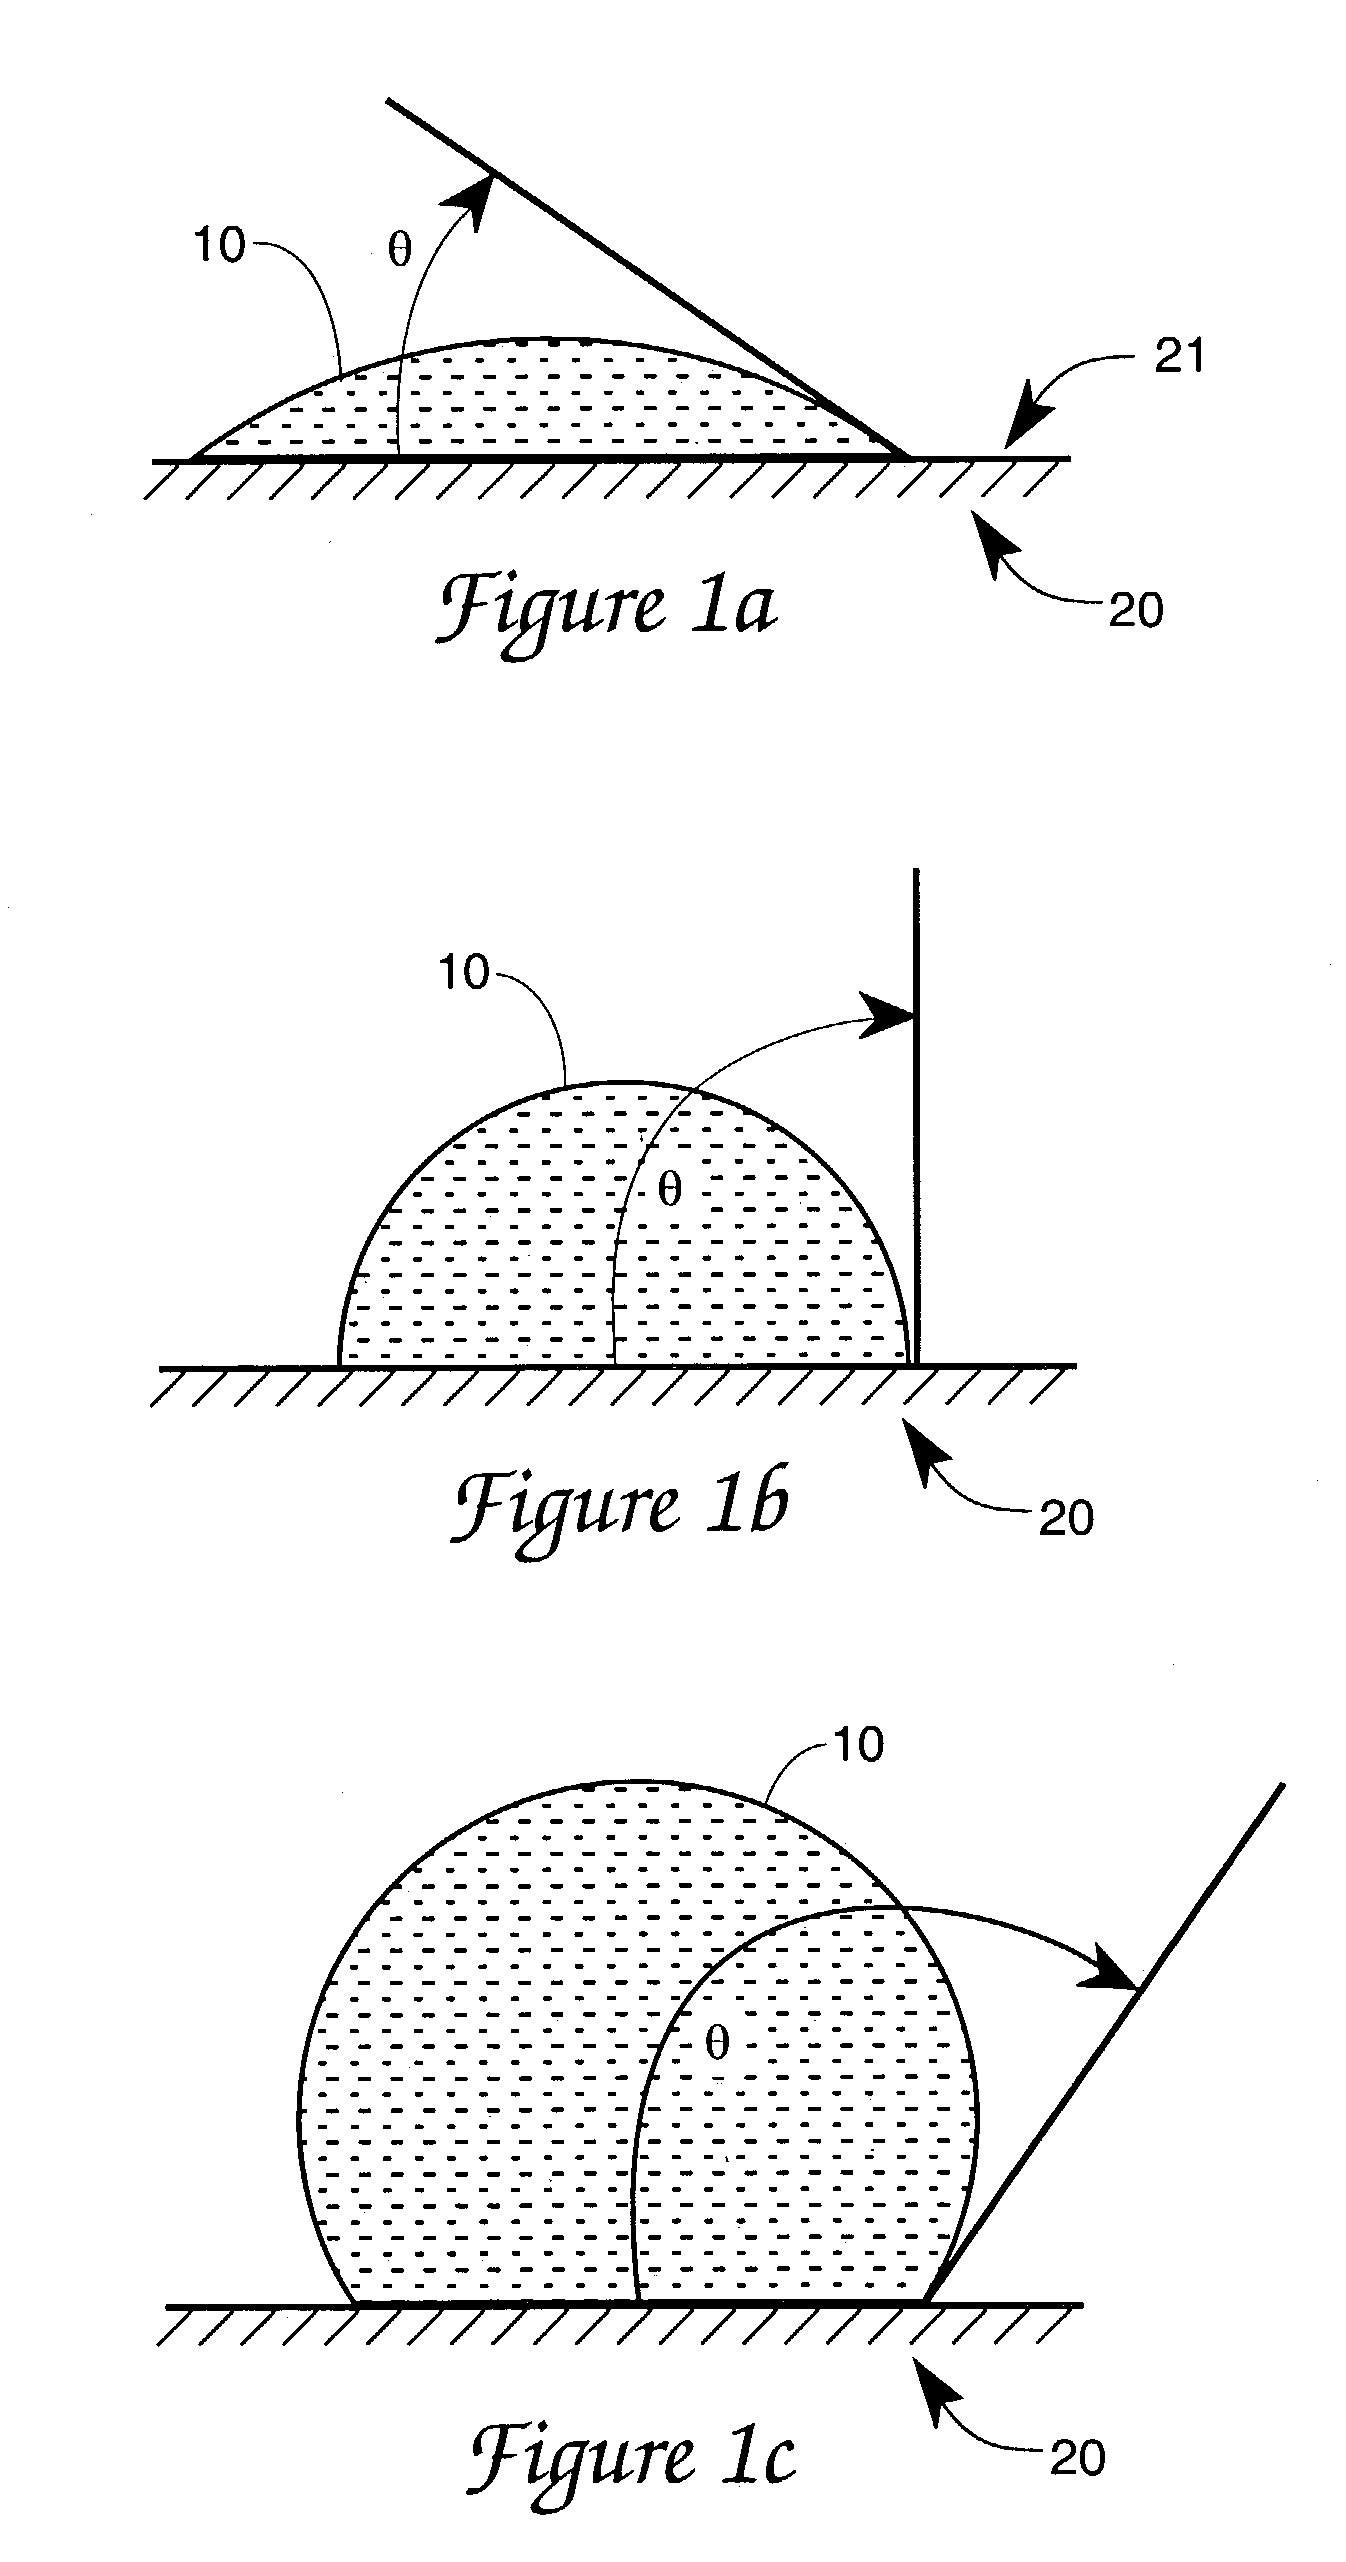 Modification of the degree of liquid contact with a solid by control of surface and micro-channel capillary geometry